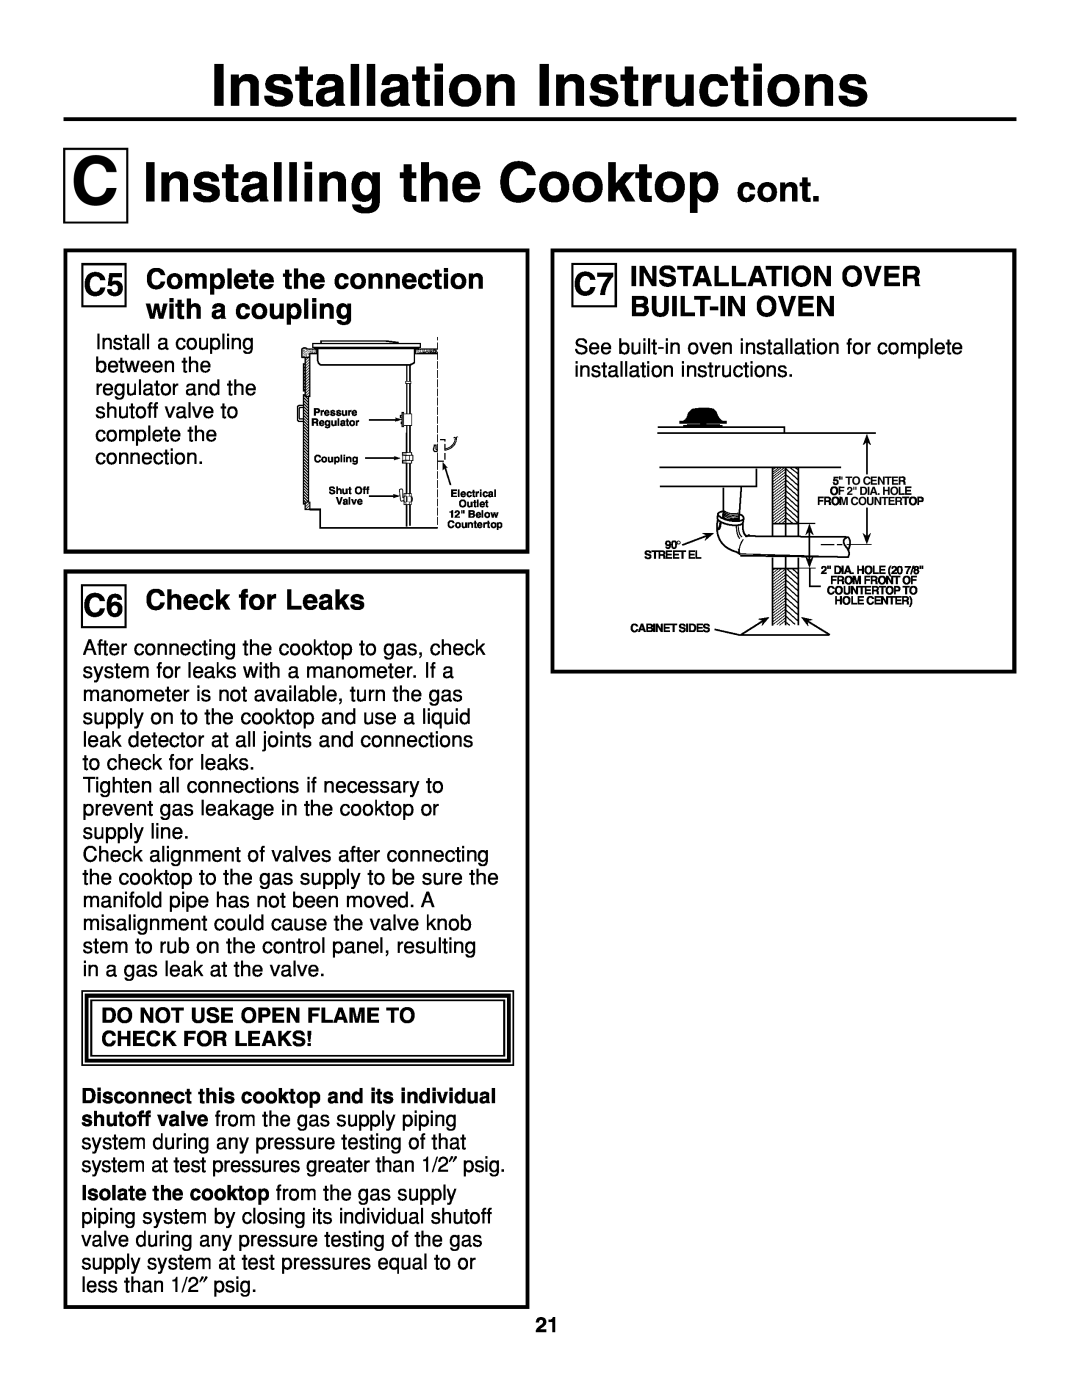 GE JGP637 Installing the Cooktop cont, C5 Complete the connection with a coupling, C7 INSTALLATION OVER BUILT-IN OVEN 